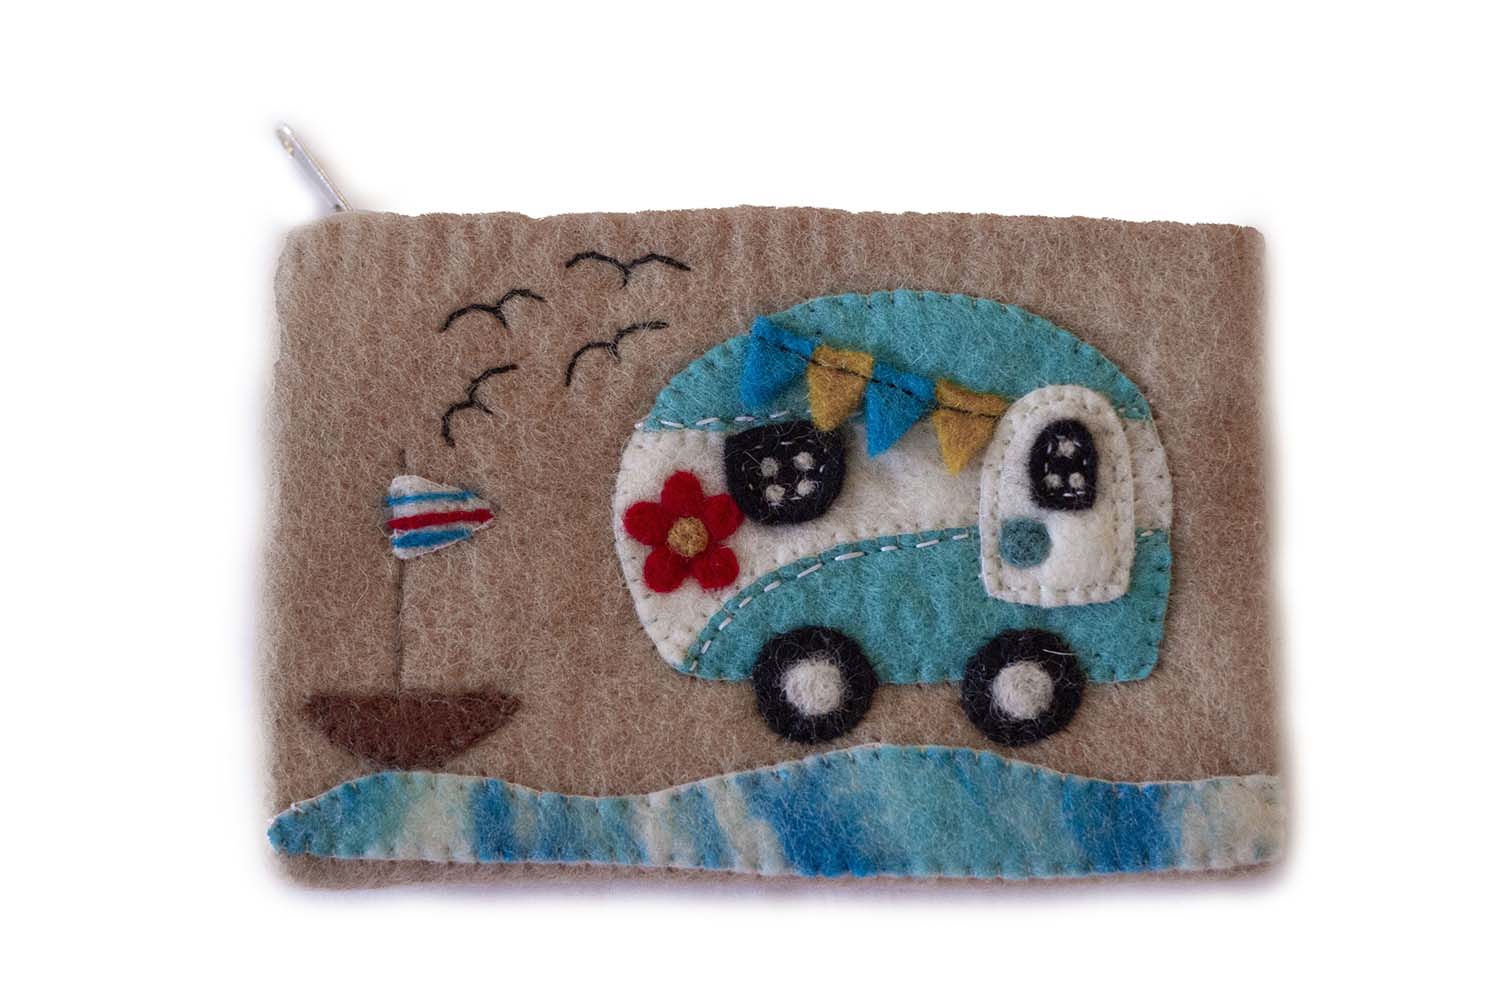 Camper Van Pouch Hand Crafted Felt - Linda Kay Gifford’s - Those Nasty Women TALK! by SWEETSurvivor